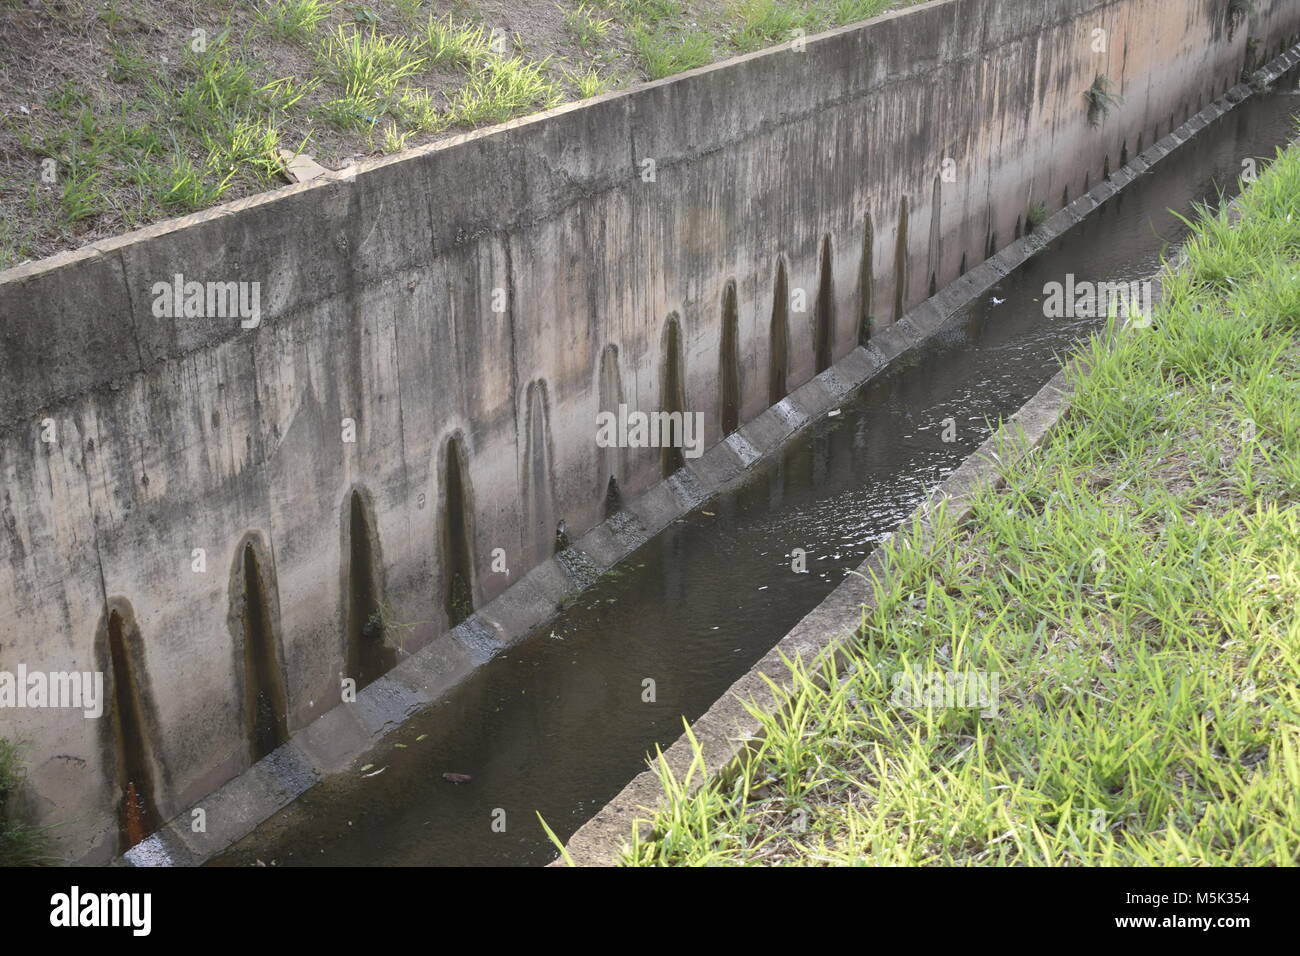 Retaining Wall With Sewer Pipe And Tribal Design Stock Photo Alamy